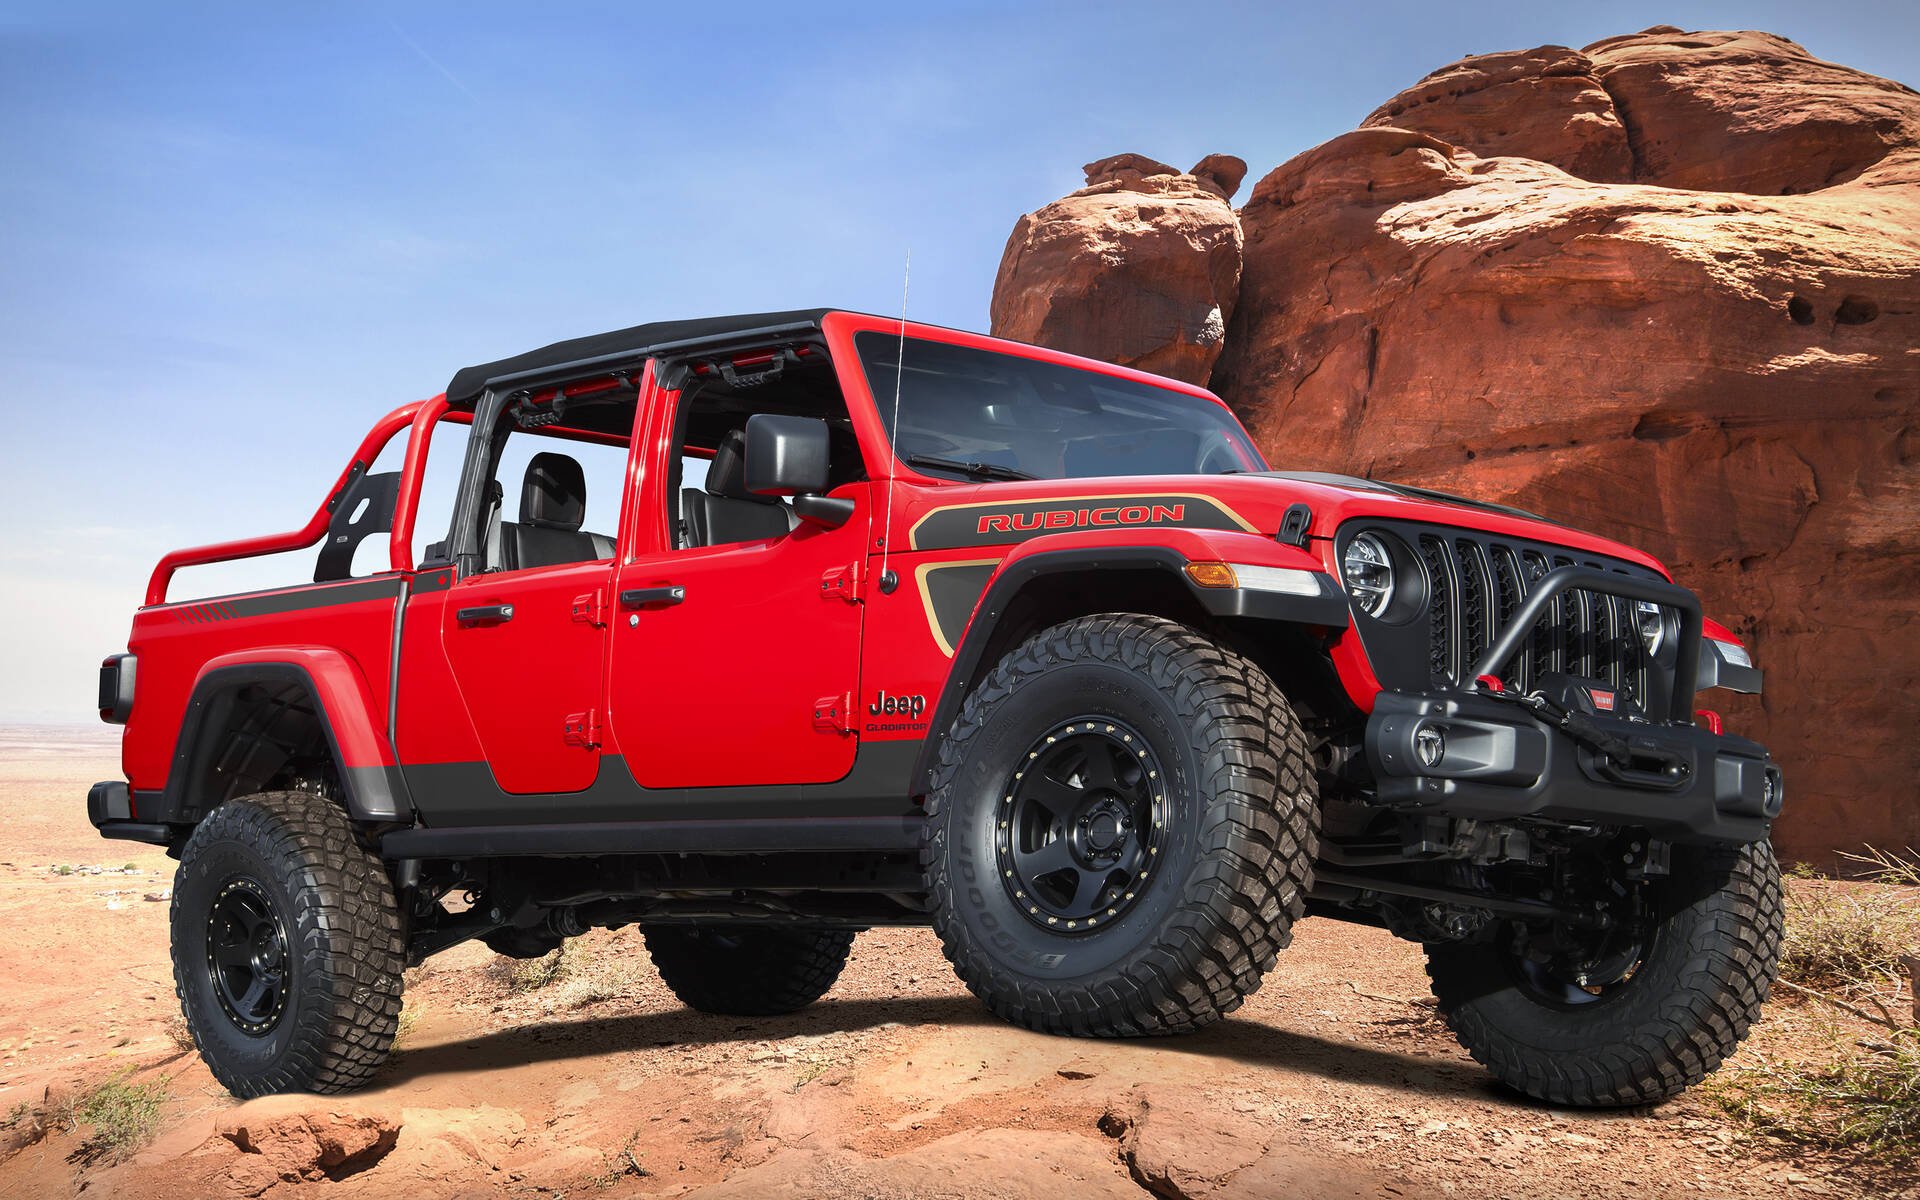 Jeep Magneto Concept Unveiled as Fully Electric Wrangler - The Car Guide